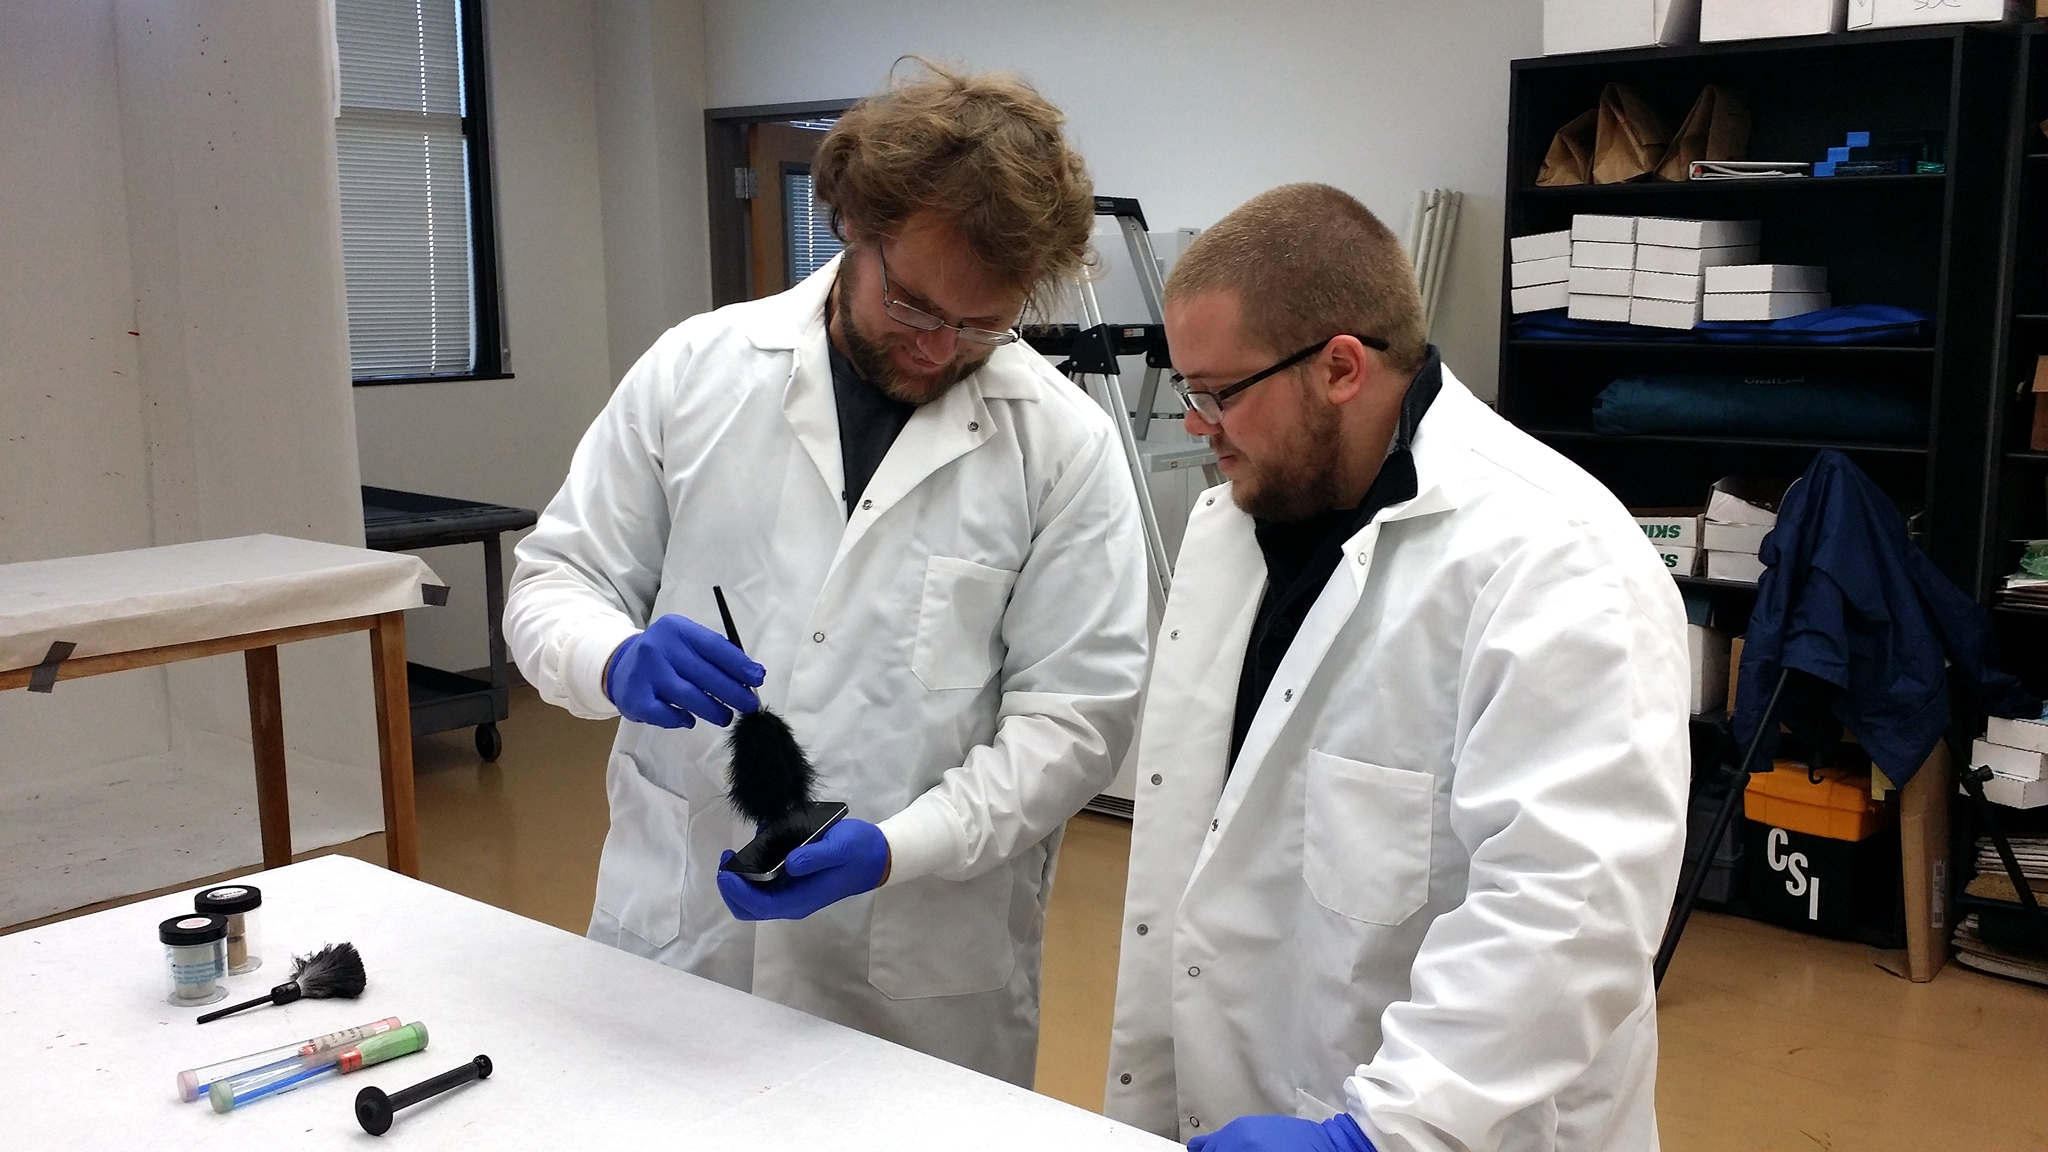 Joshua Sablatura and Robert McDown working on FAST project research